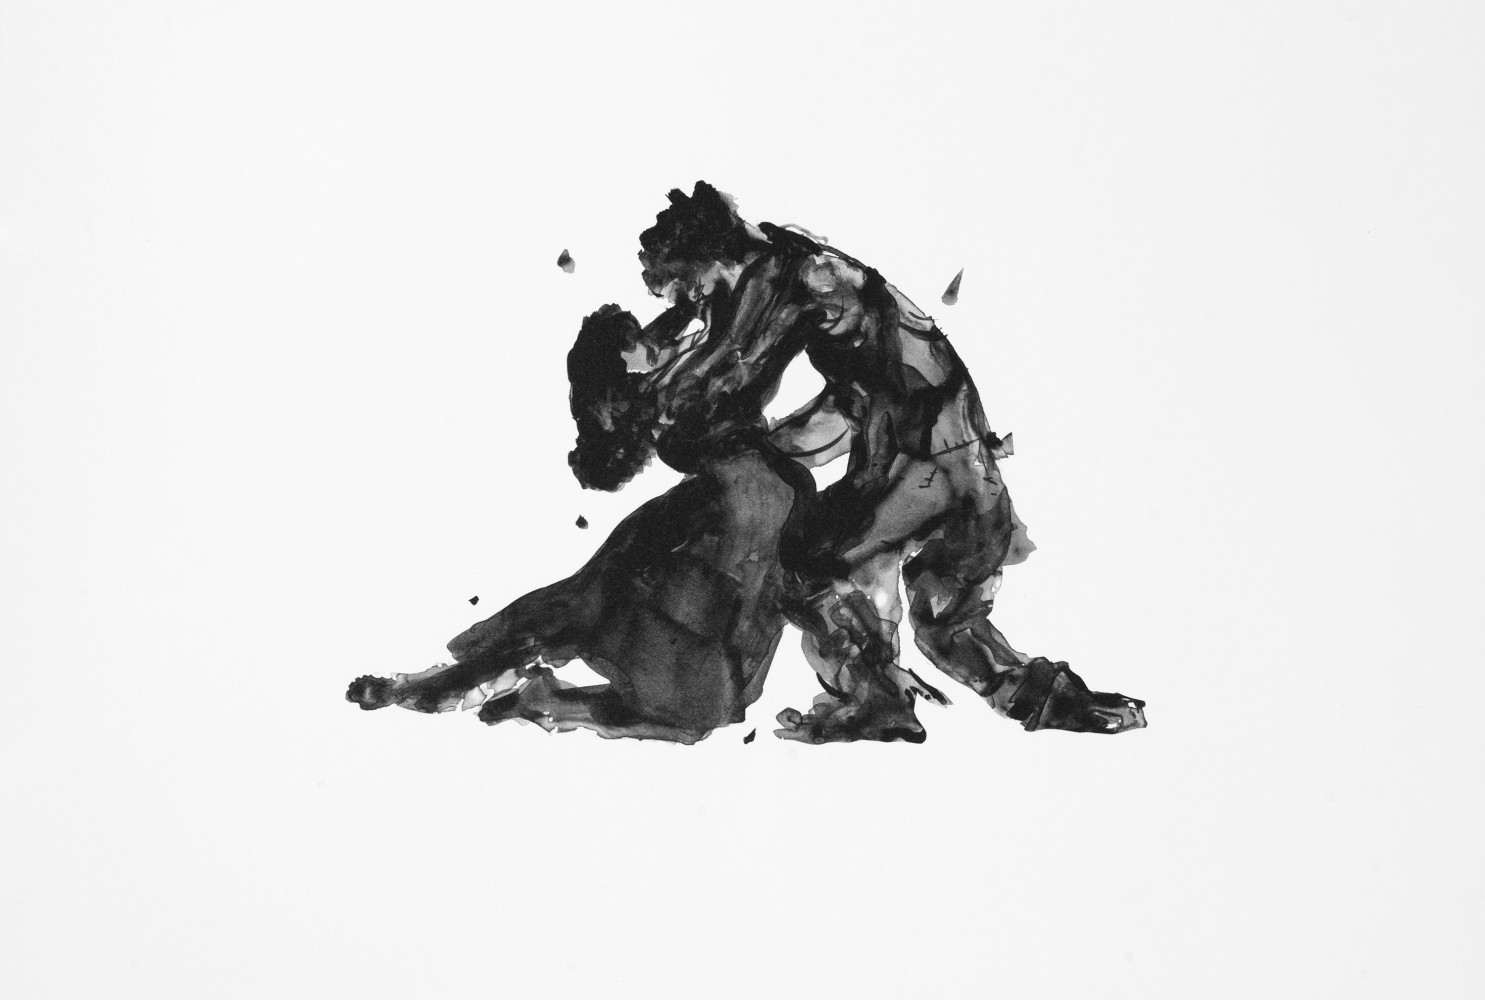 Porgy and Bess, Embracing, 2013, by Kara Walker (American, b. 1969), lithograph on paper, museum purchase, 2015.005.0005. 